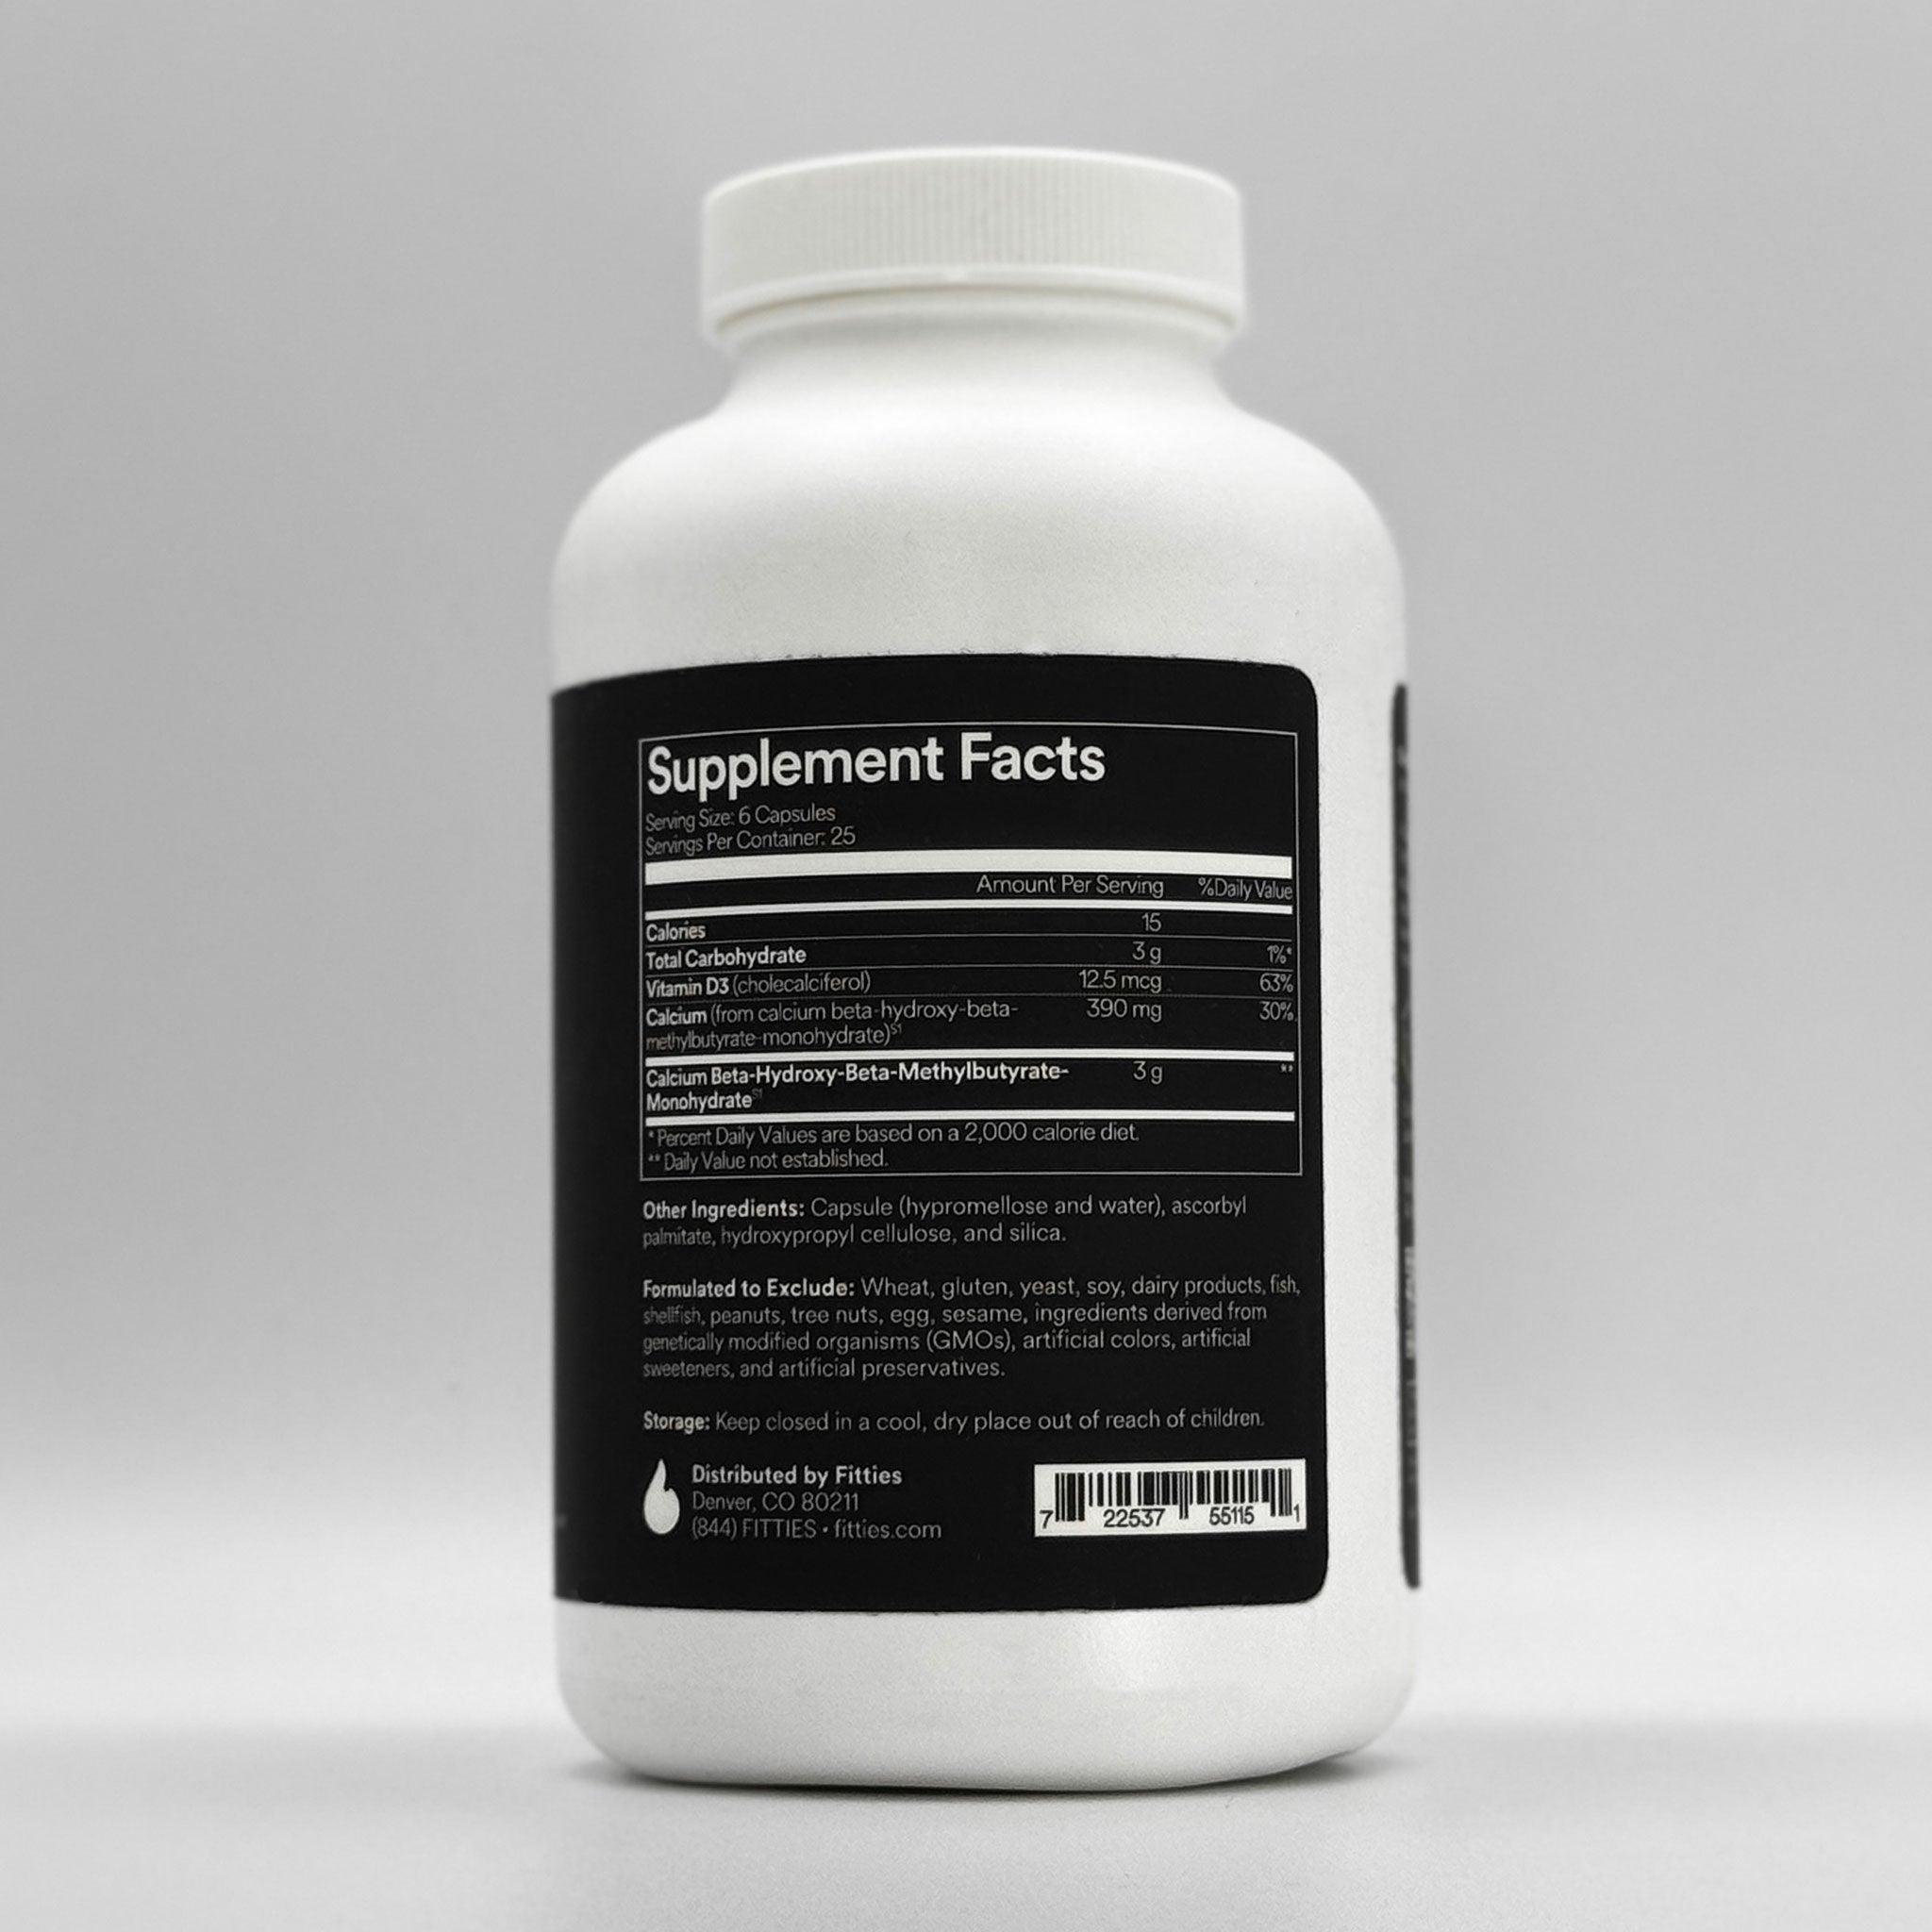 Fitties FitRestore supplement facts label